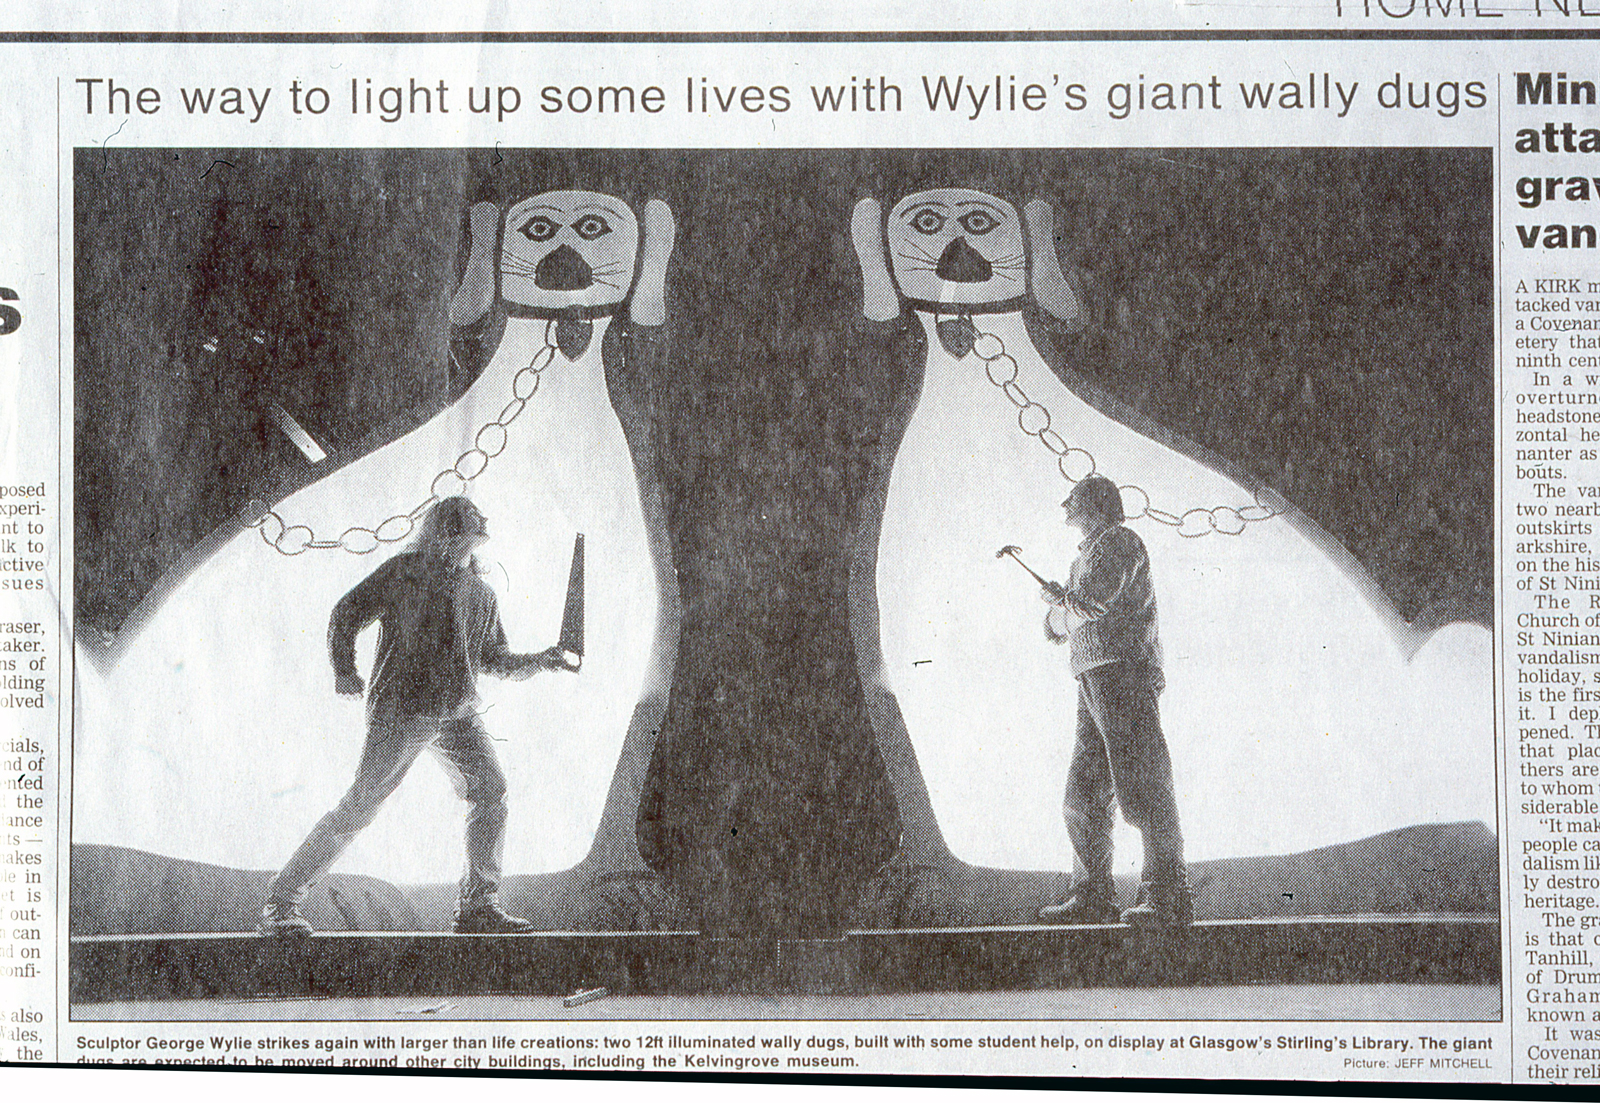 Cutting from the Herald newspaper - photo of laminated Wally Dug sculptures with two people standing.